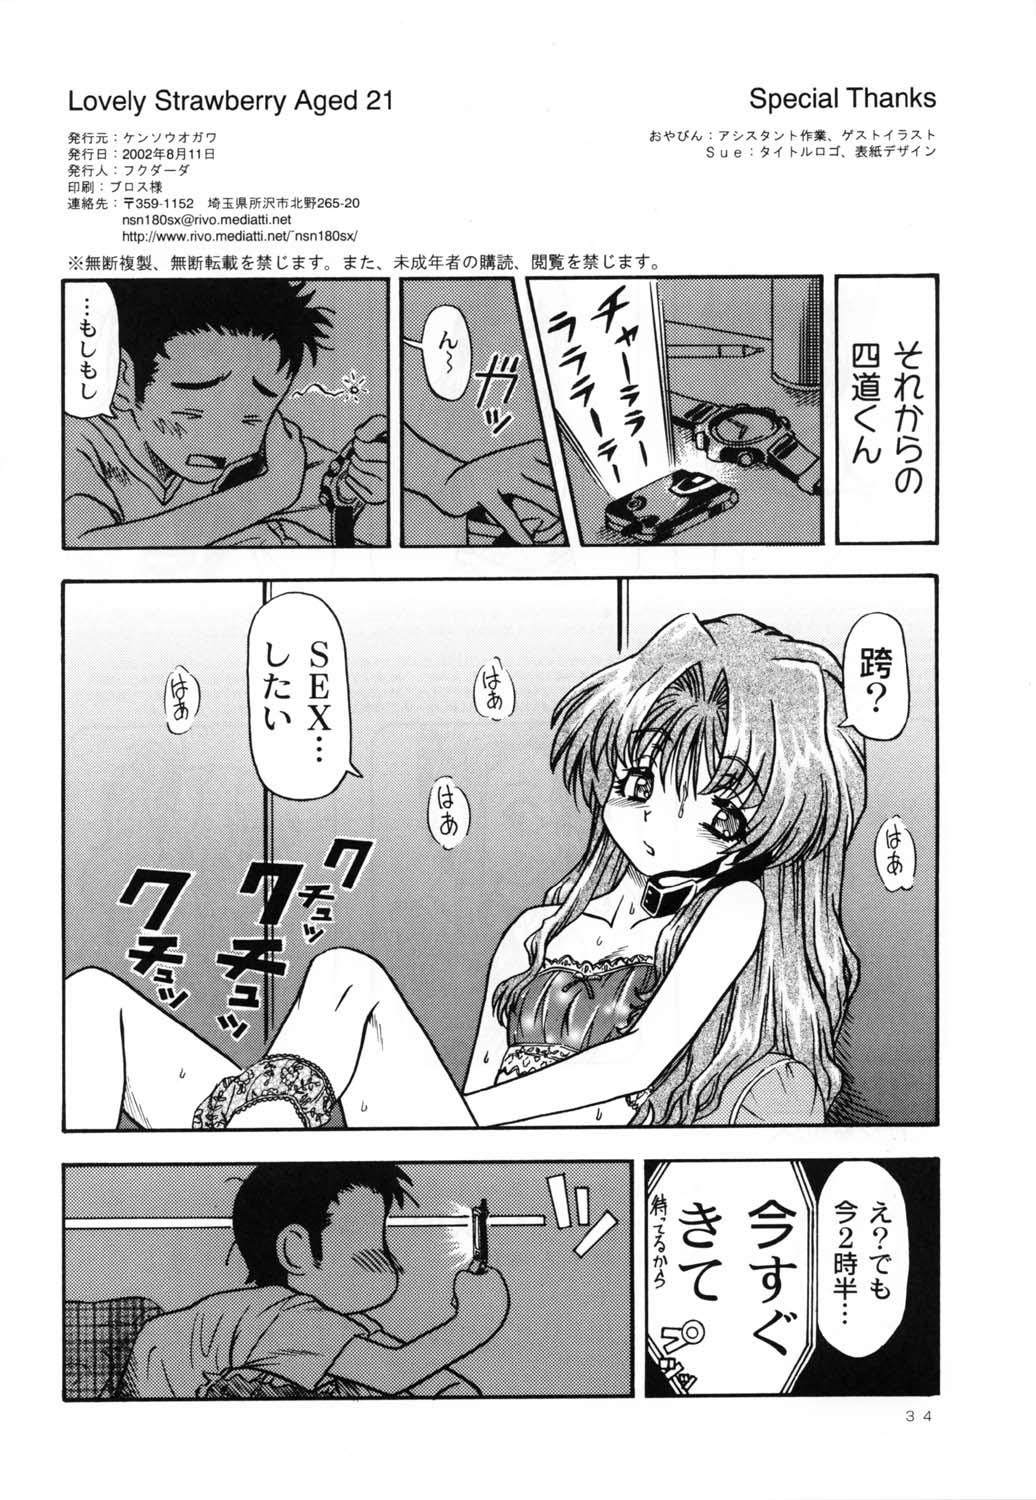 Amatuer Lovely Strawberry Aged 21 Extra Edition - Onegai teacher Dicksucking - Page 50